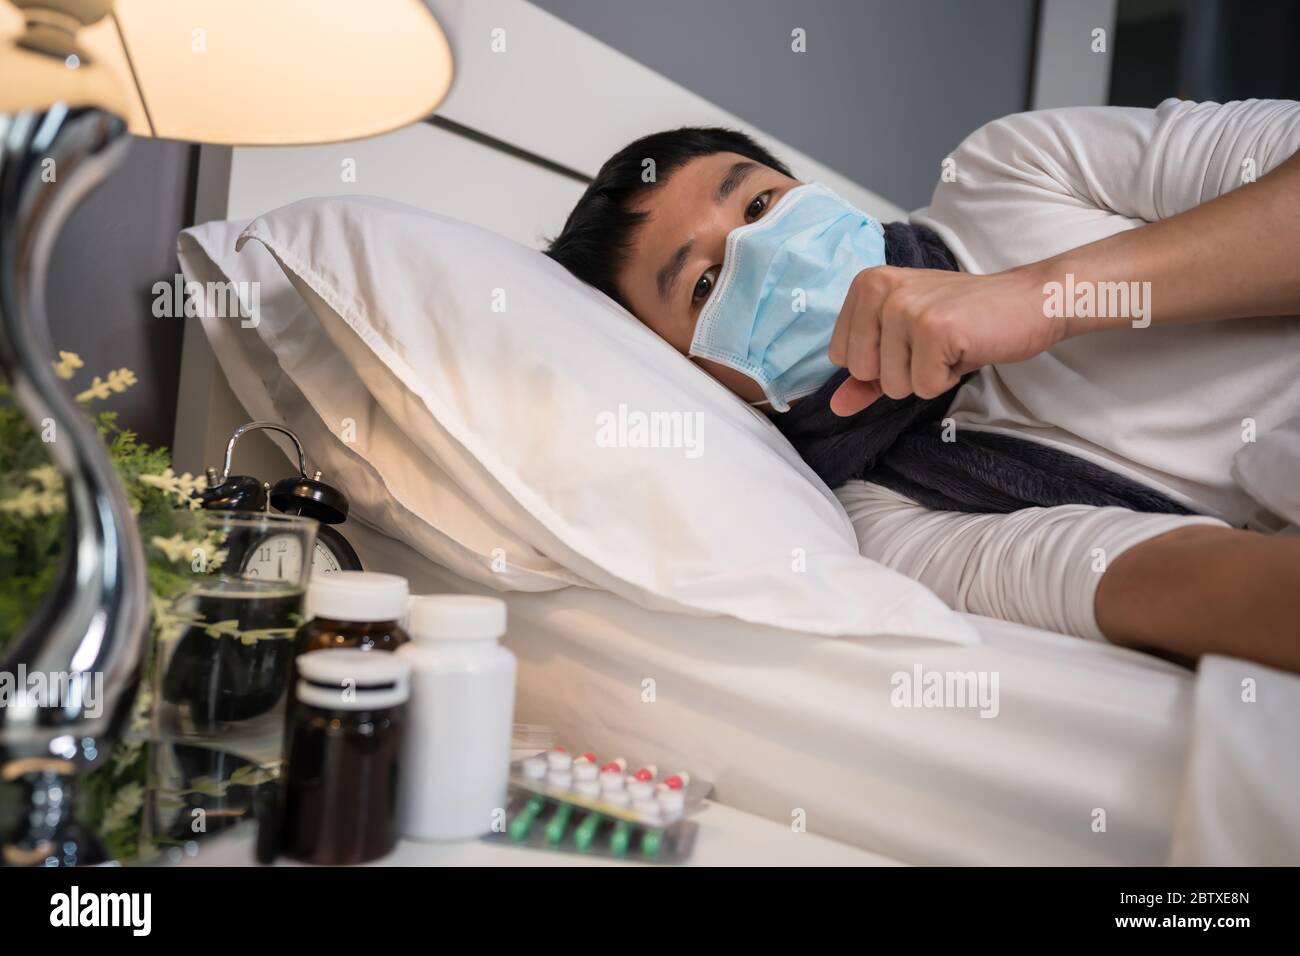 sick man in medical mask coughing and suffering from virus disease and fever in a bed, coronavirus (covid-19) pandemic concept. Stock Photo